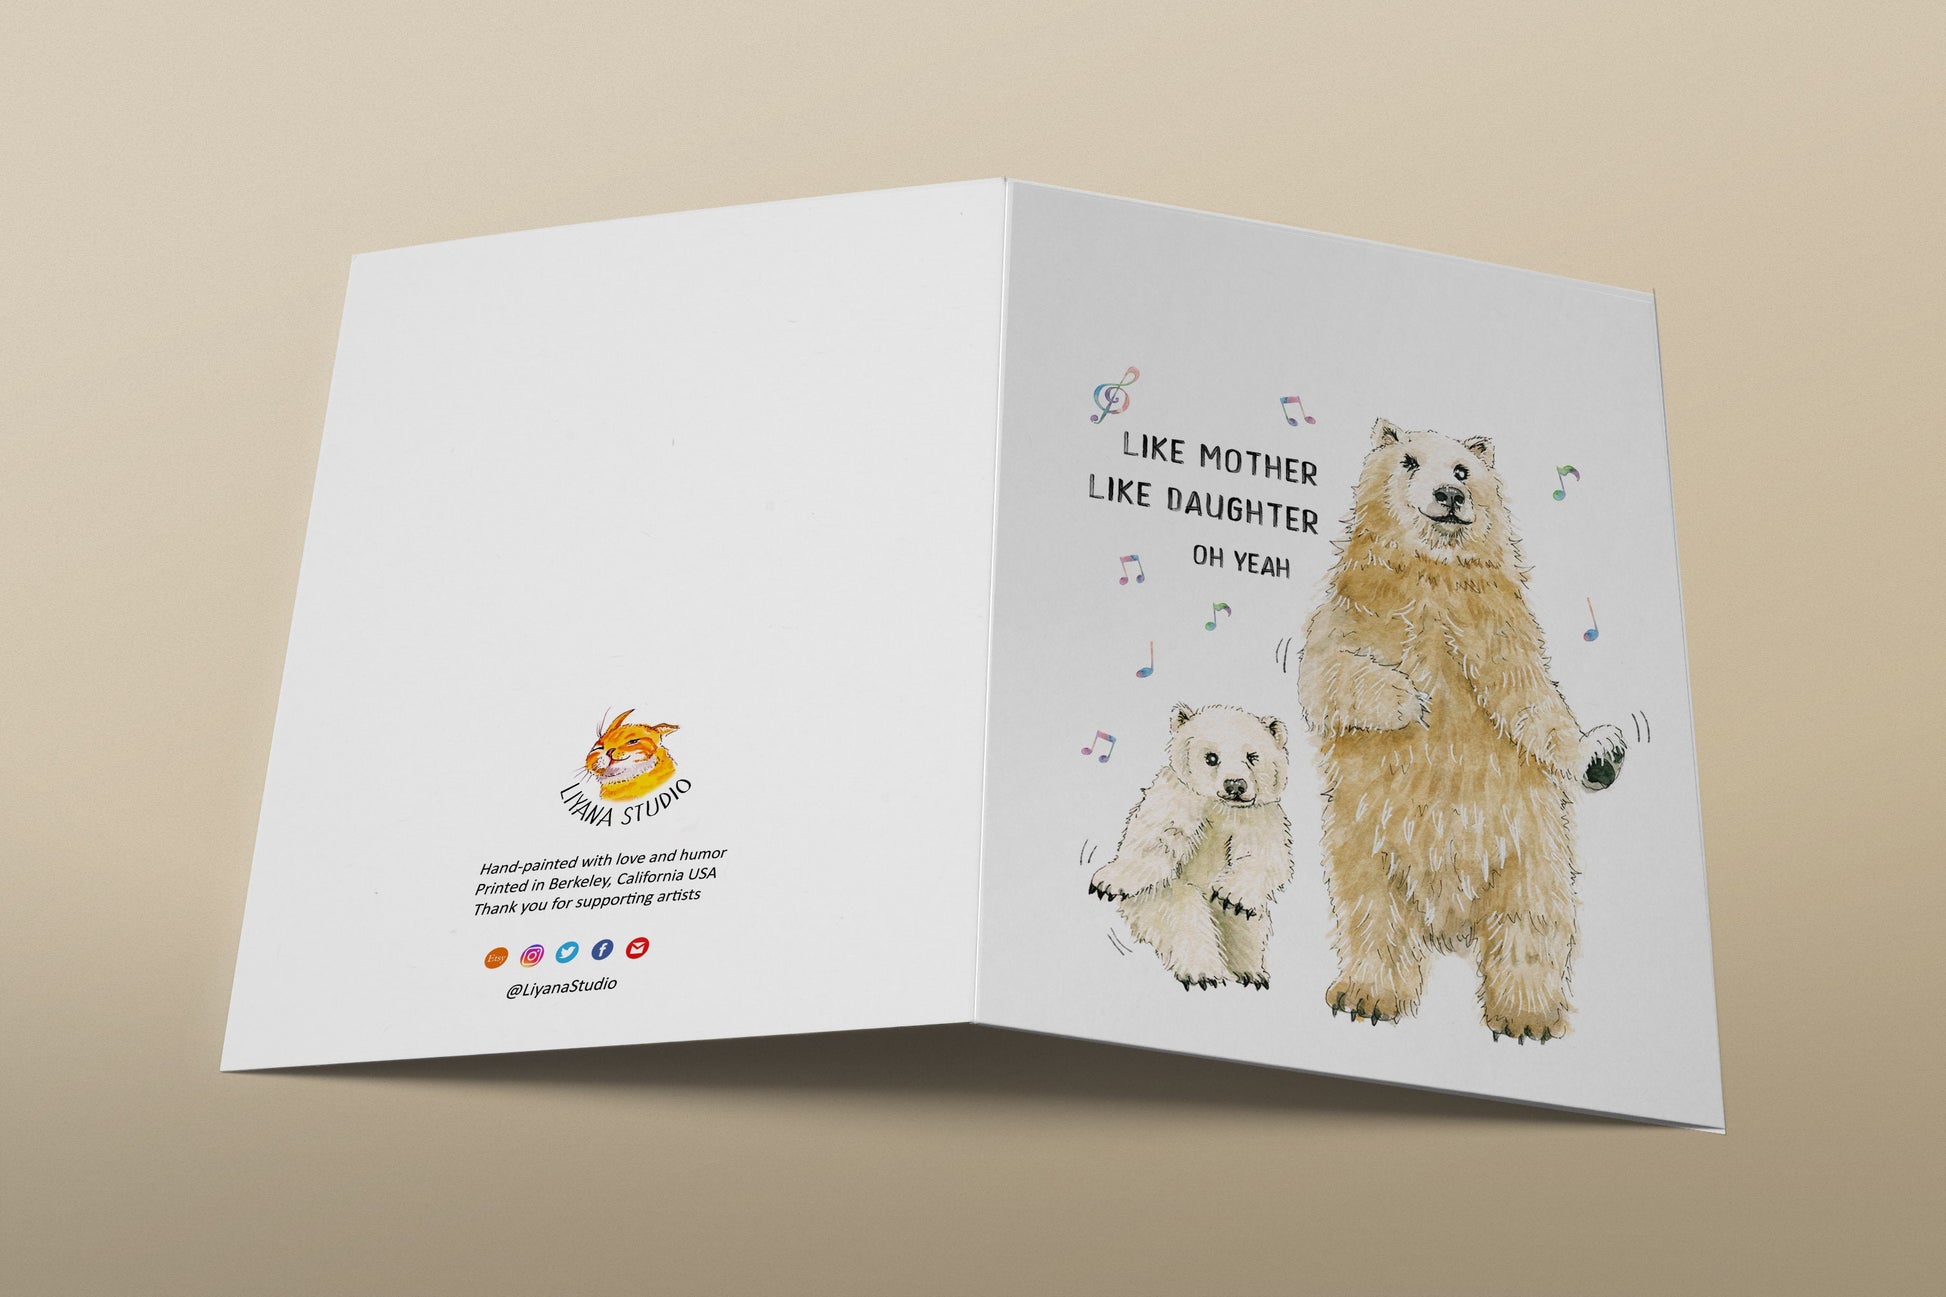 Polar Bear Funny Mother's Day Card - Like Mother Like Daughter Oh Yeah - Bear Mama And Baby Cub Dance